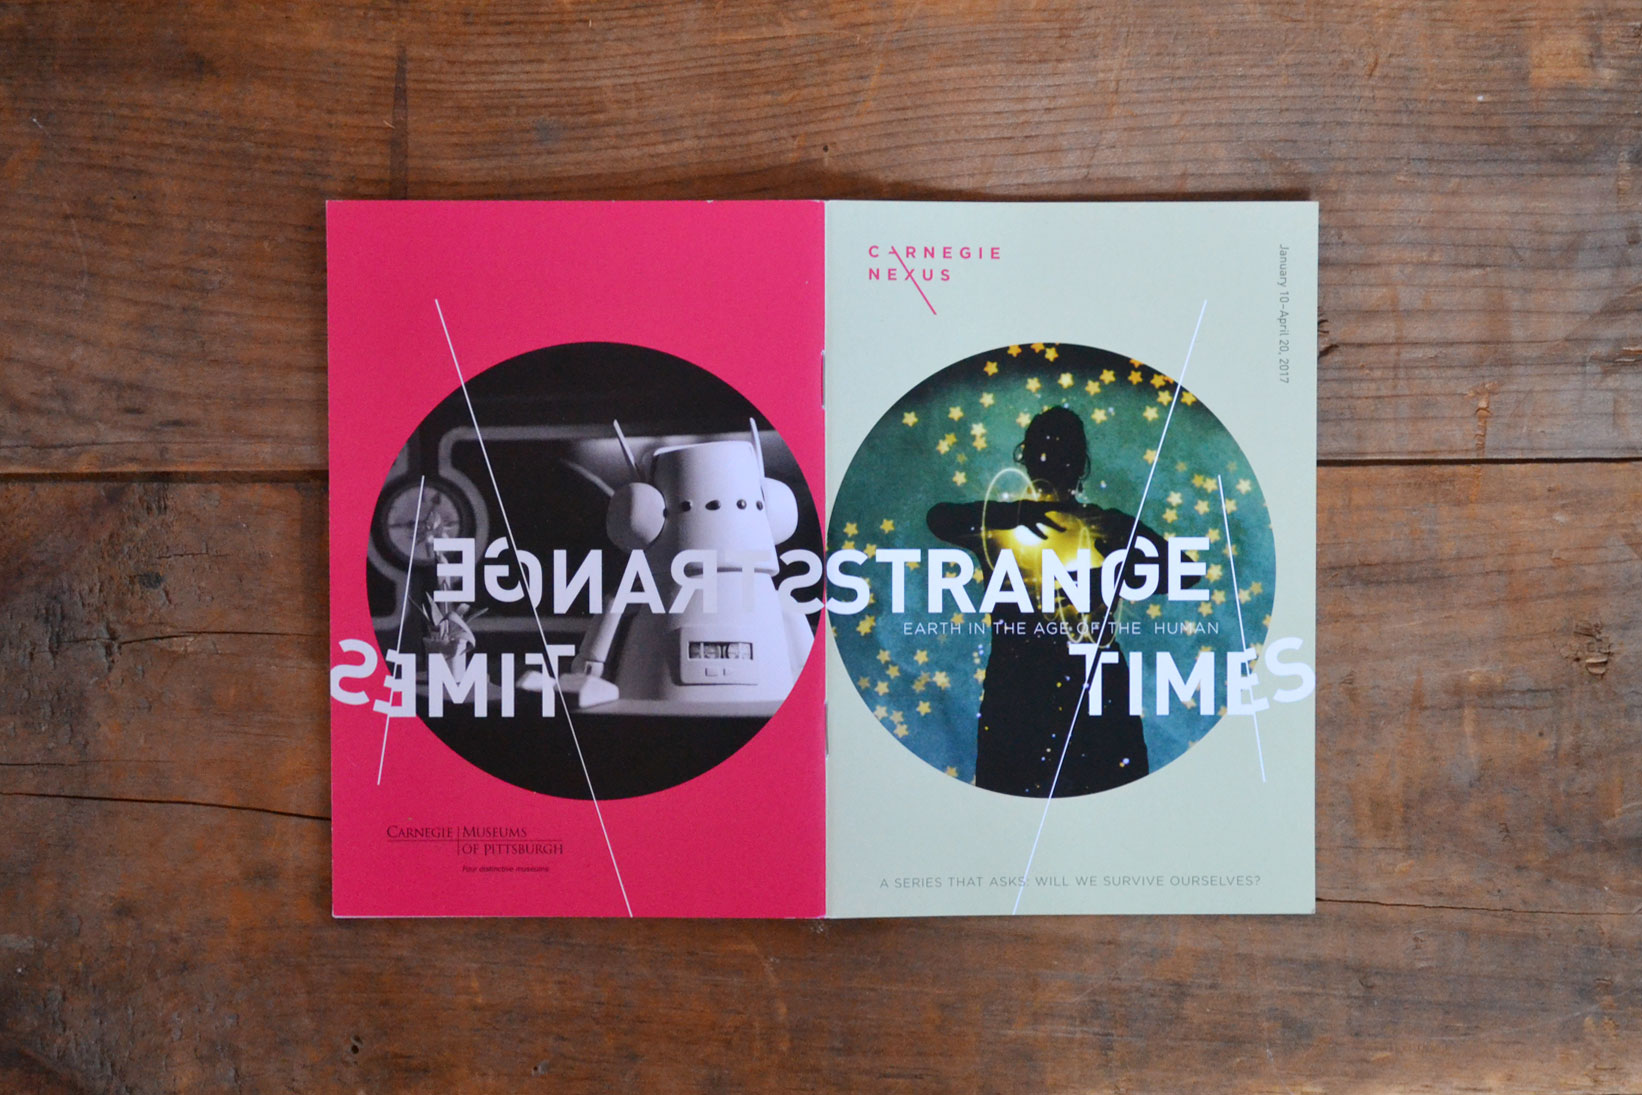 Strange Times booklet front and back cover